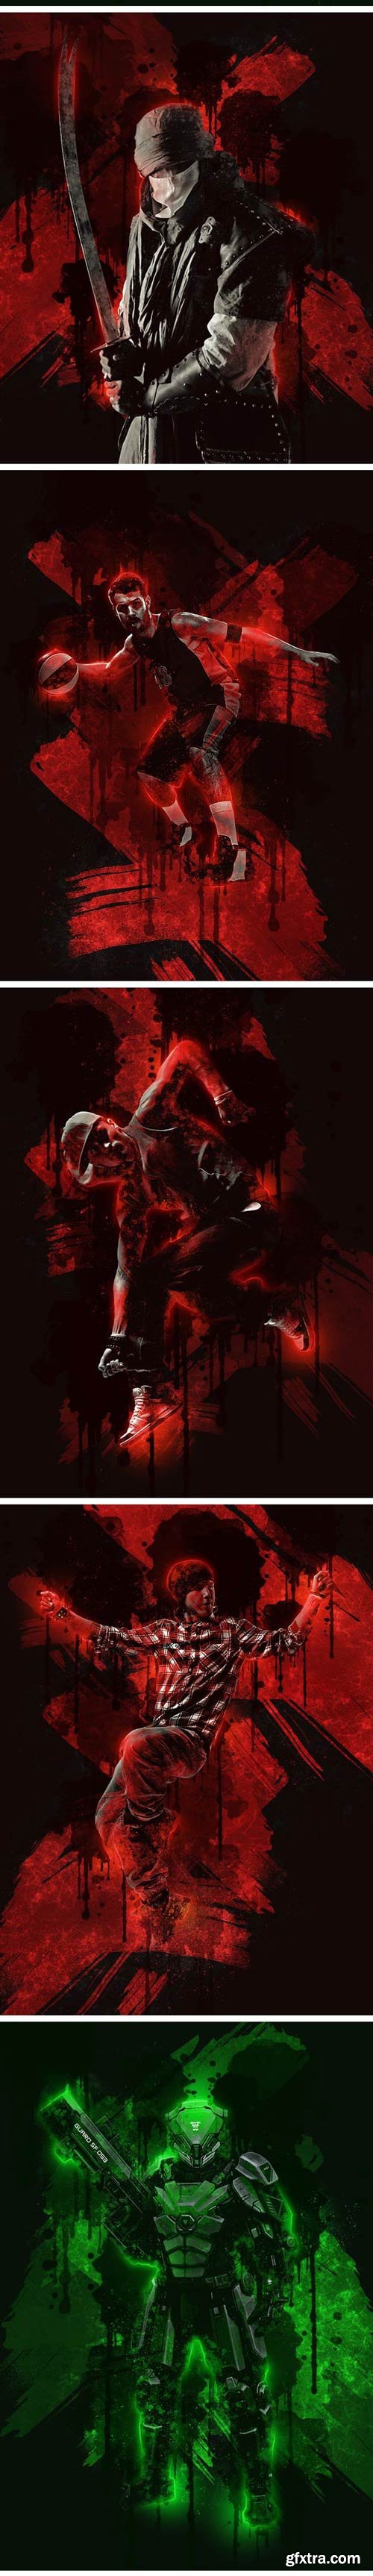 GraphicRiver - Ink Art Photoshop Action - 20079548